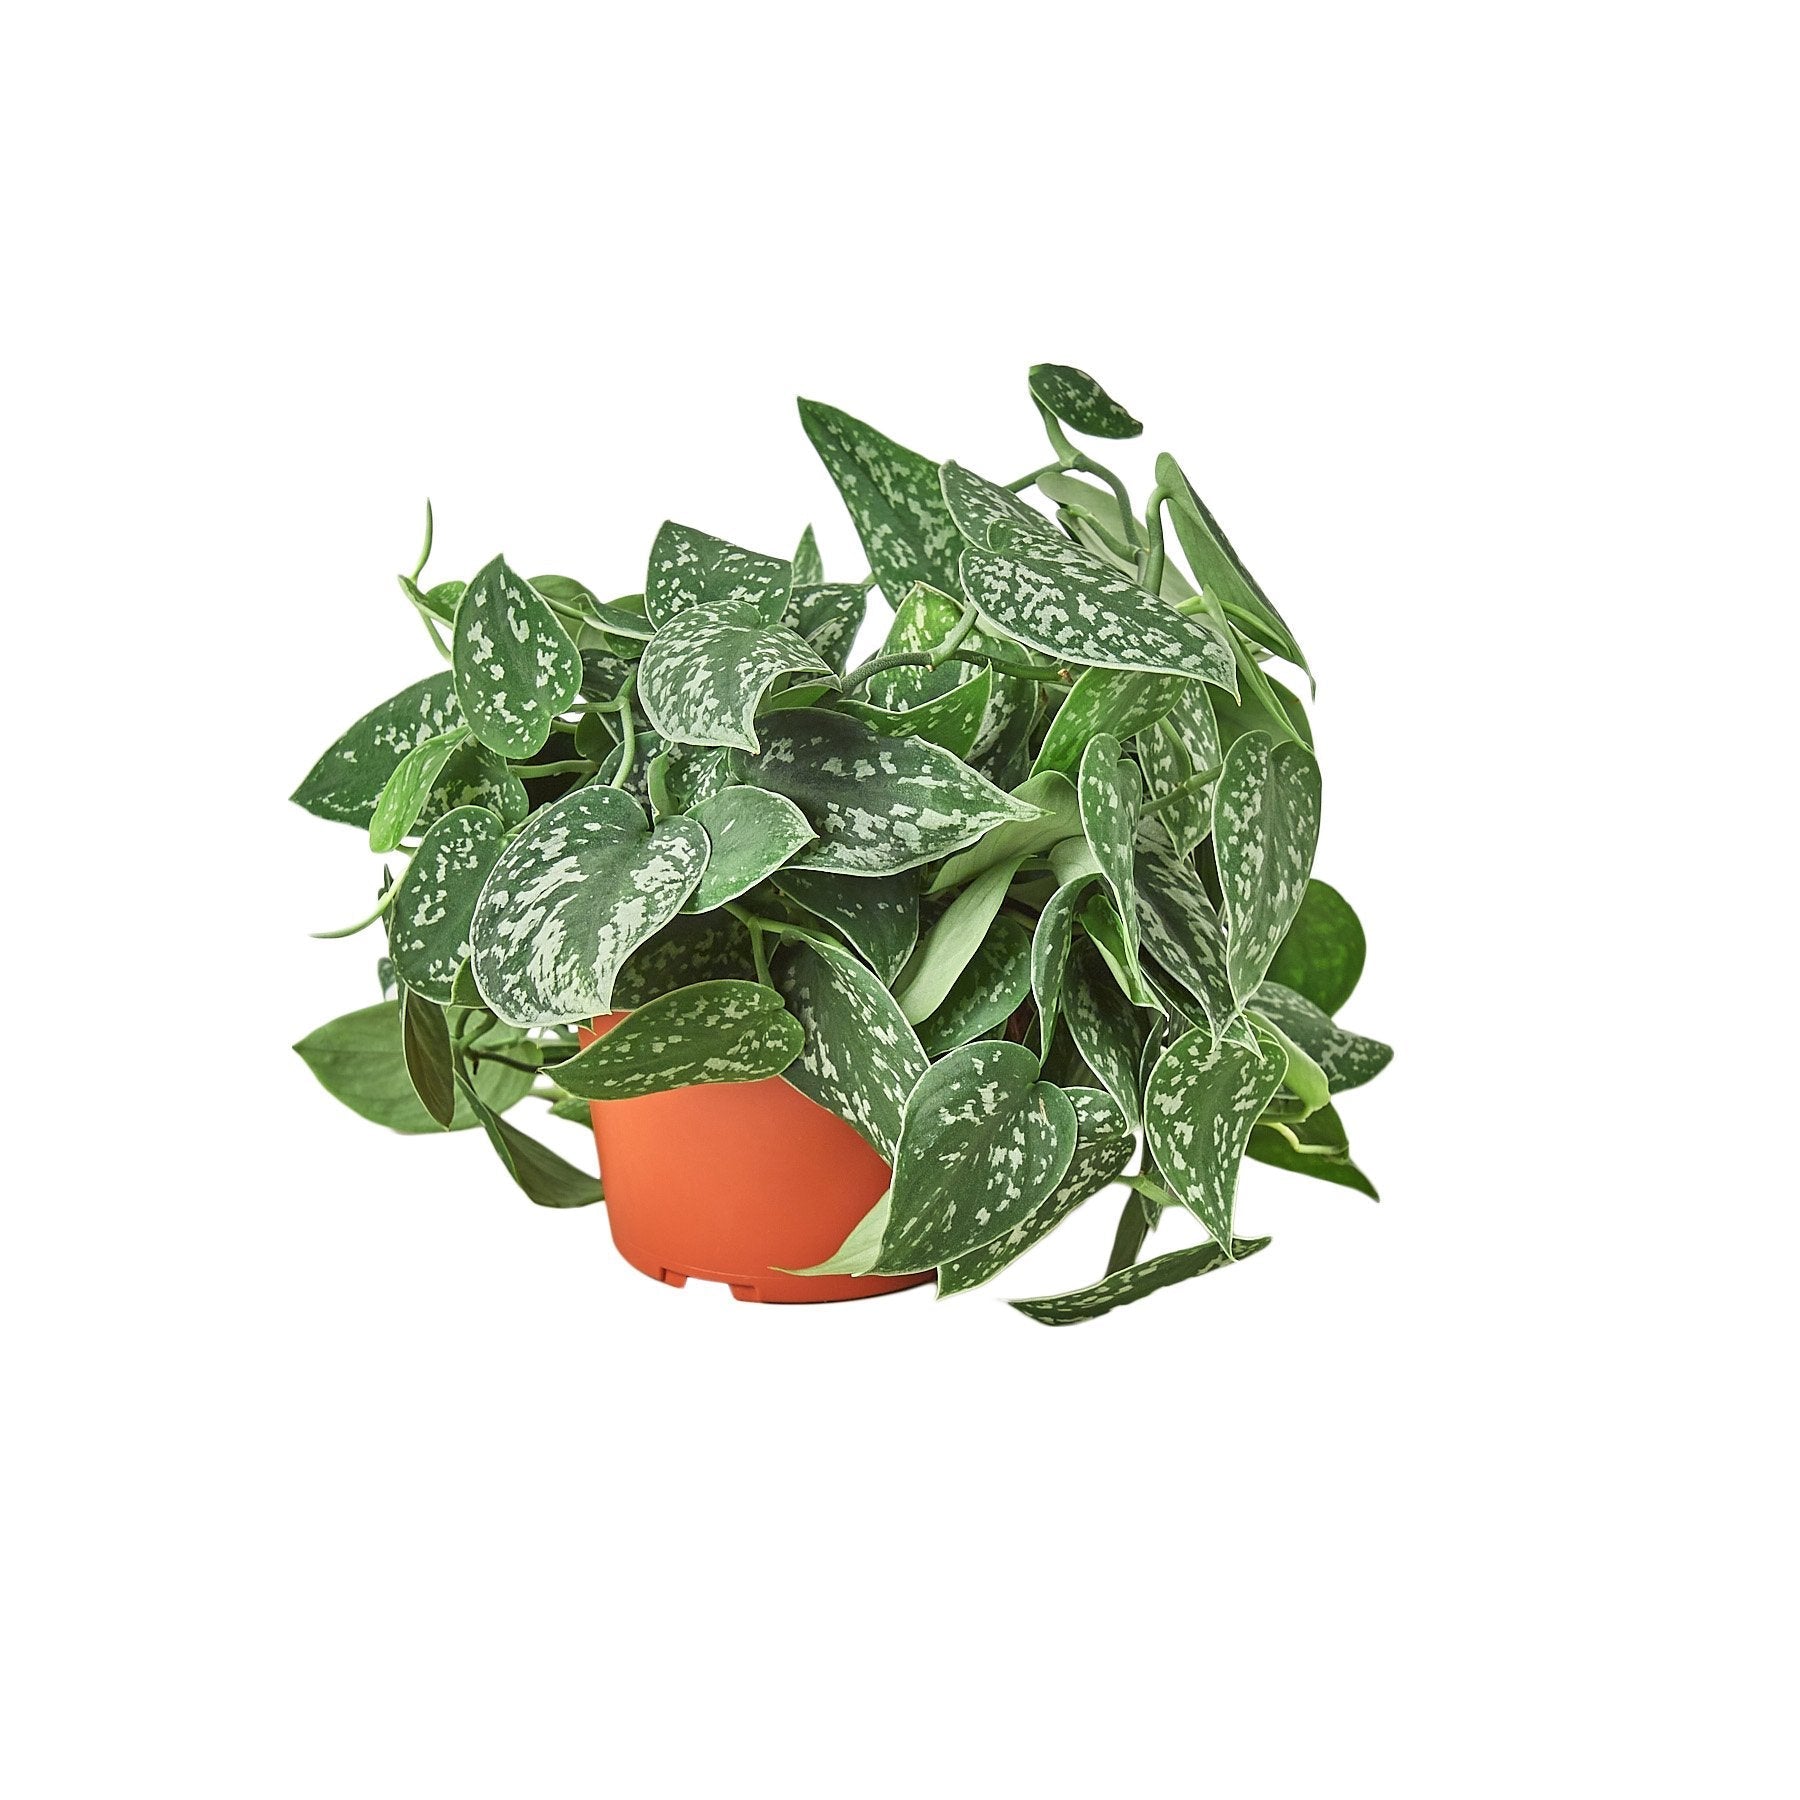 A plant in an orange pot on a white background, available at the best nursery near me.